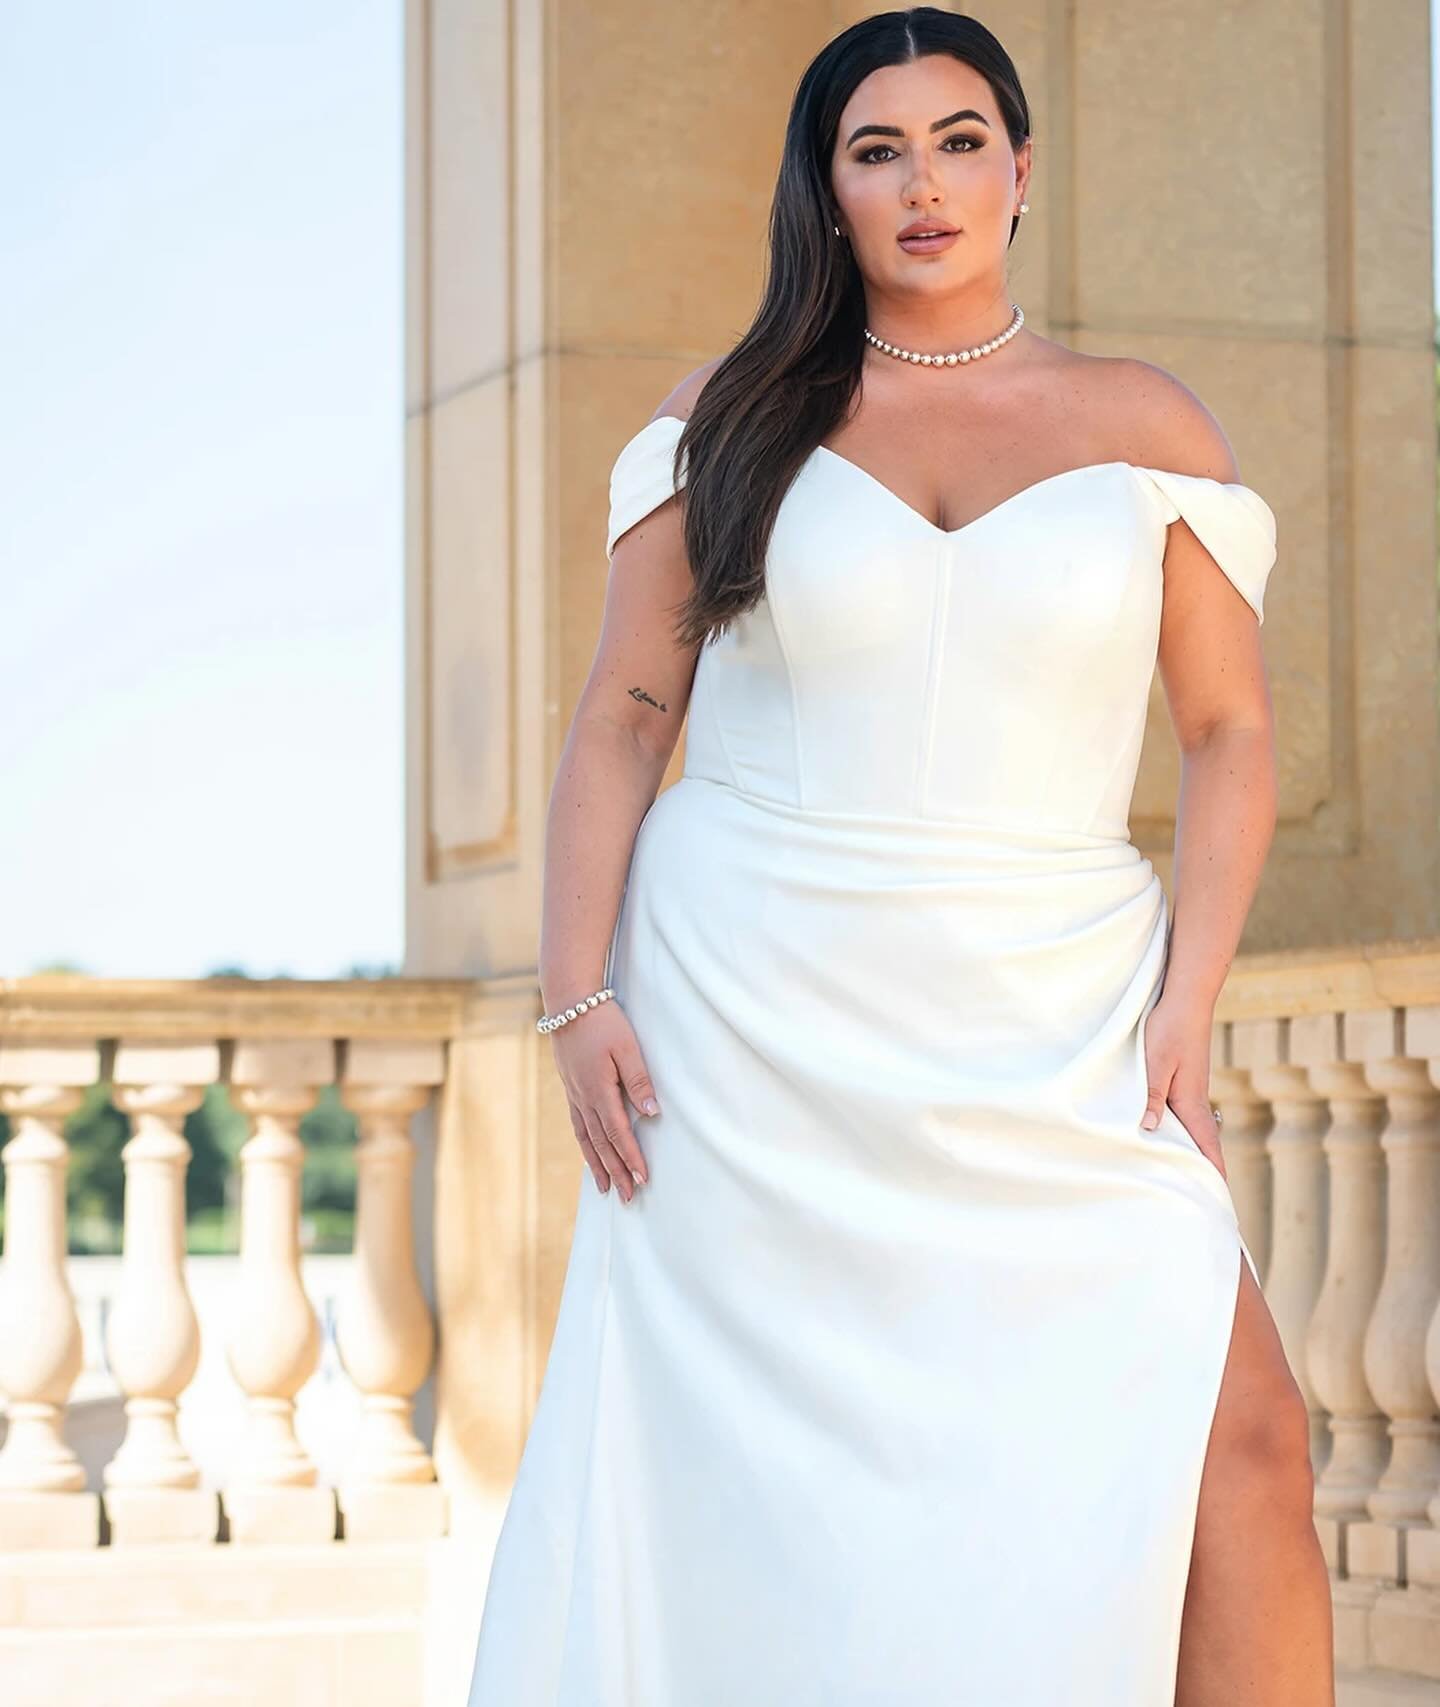 The perfect clean gown with a little bit of drama 💫

This gorgeous gown and other plus size @essenseofaustralia dresses will be 10% off during our EverBody/EveryBride Trunk Show 4/26-4/28. Appointments required!

#essenseofaustralia #plussizefashion